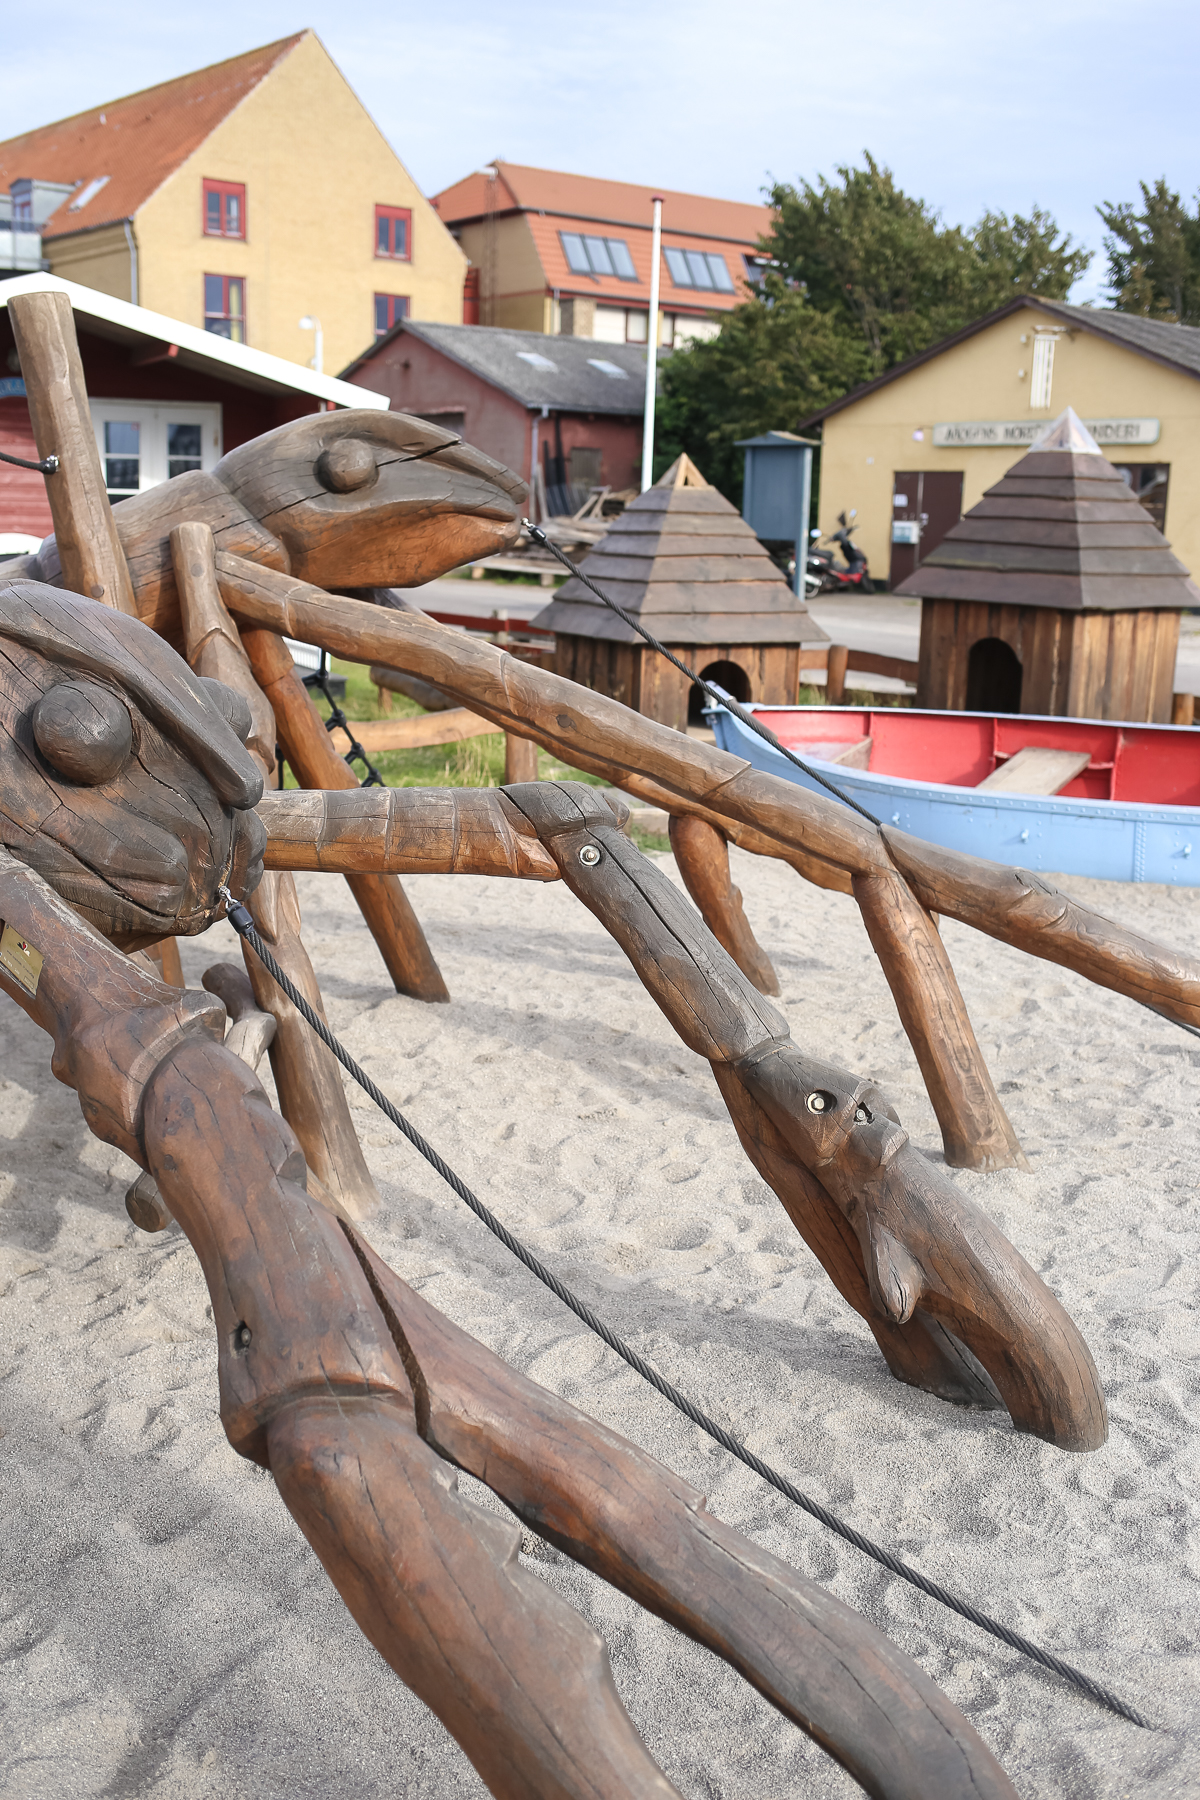 A natural, inspired playground in Hundested Harbor on the Danish Riviera.  Play spaces in Denmark always seem to bring together the perfect intersection between nature and play for toddlers and children.